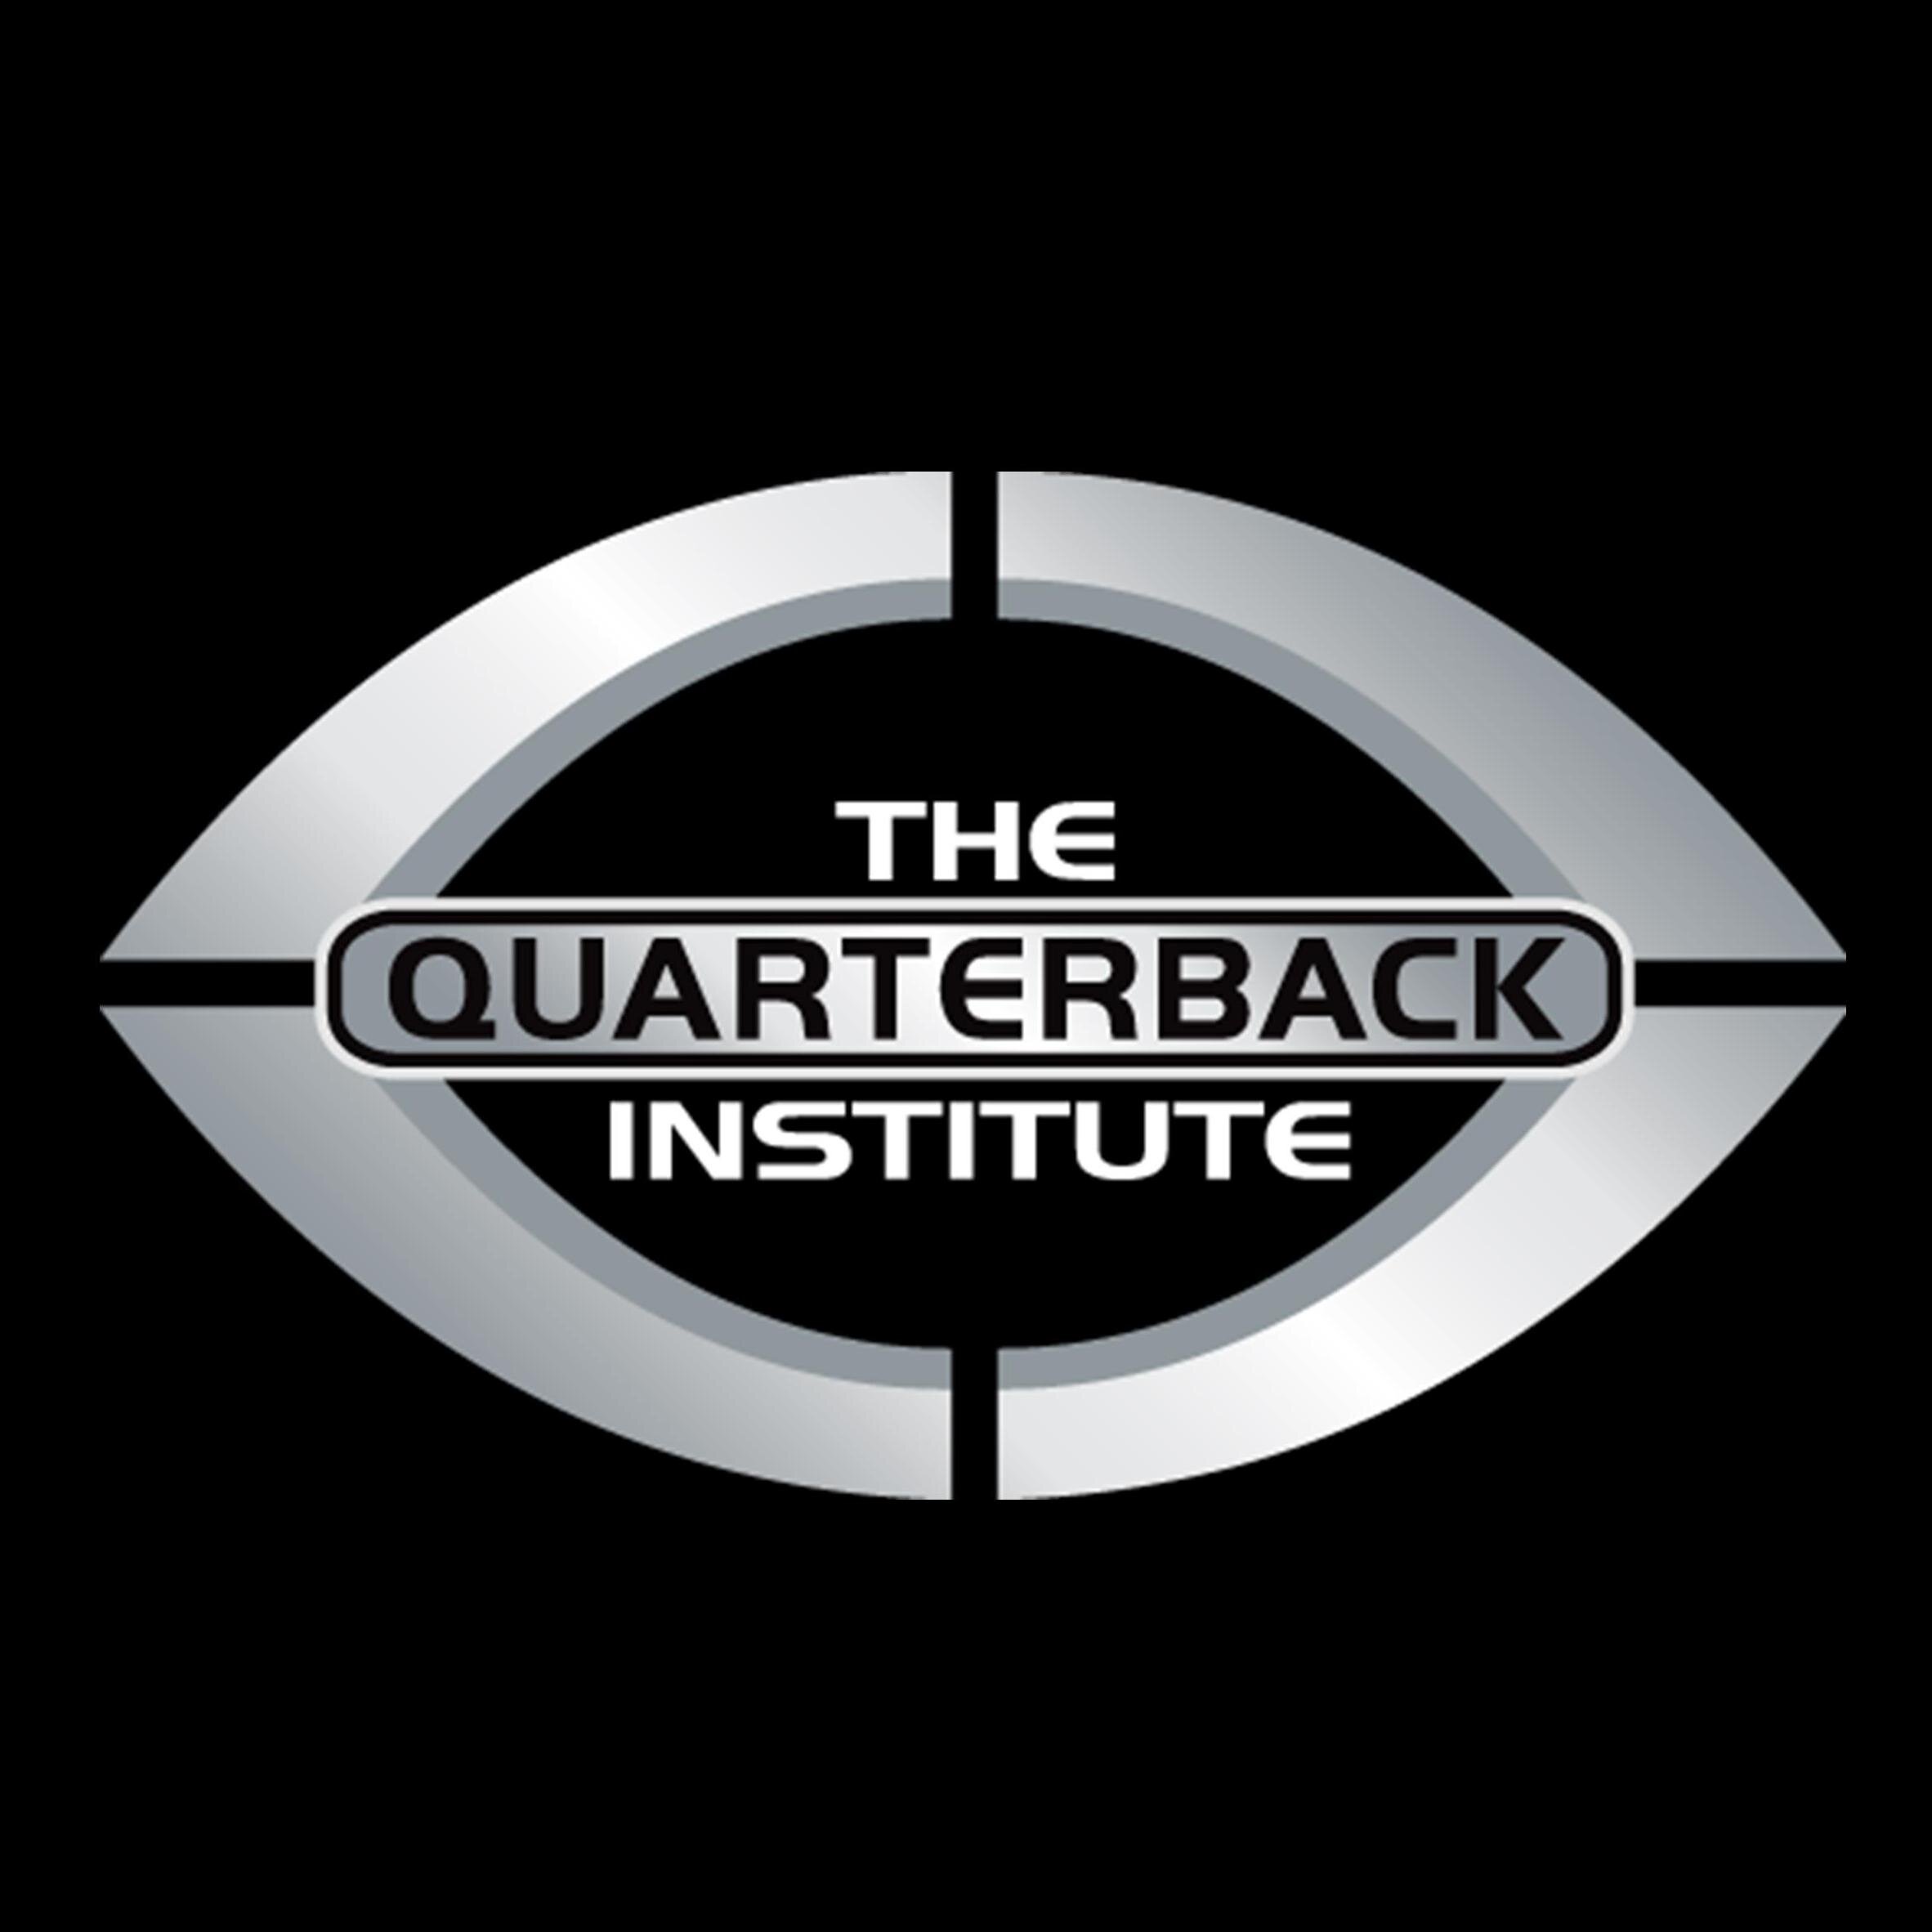 The Quarterback Institute: Efficiency. Accuracy. Balance. Posture. Decision-making. #QBstrong @inspiredathletx